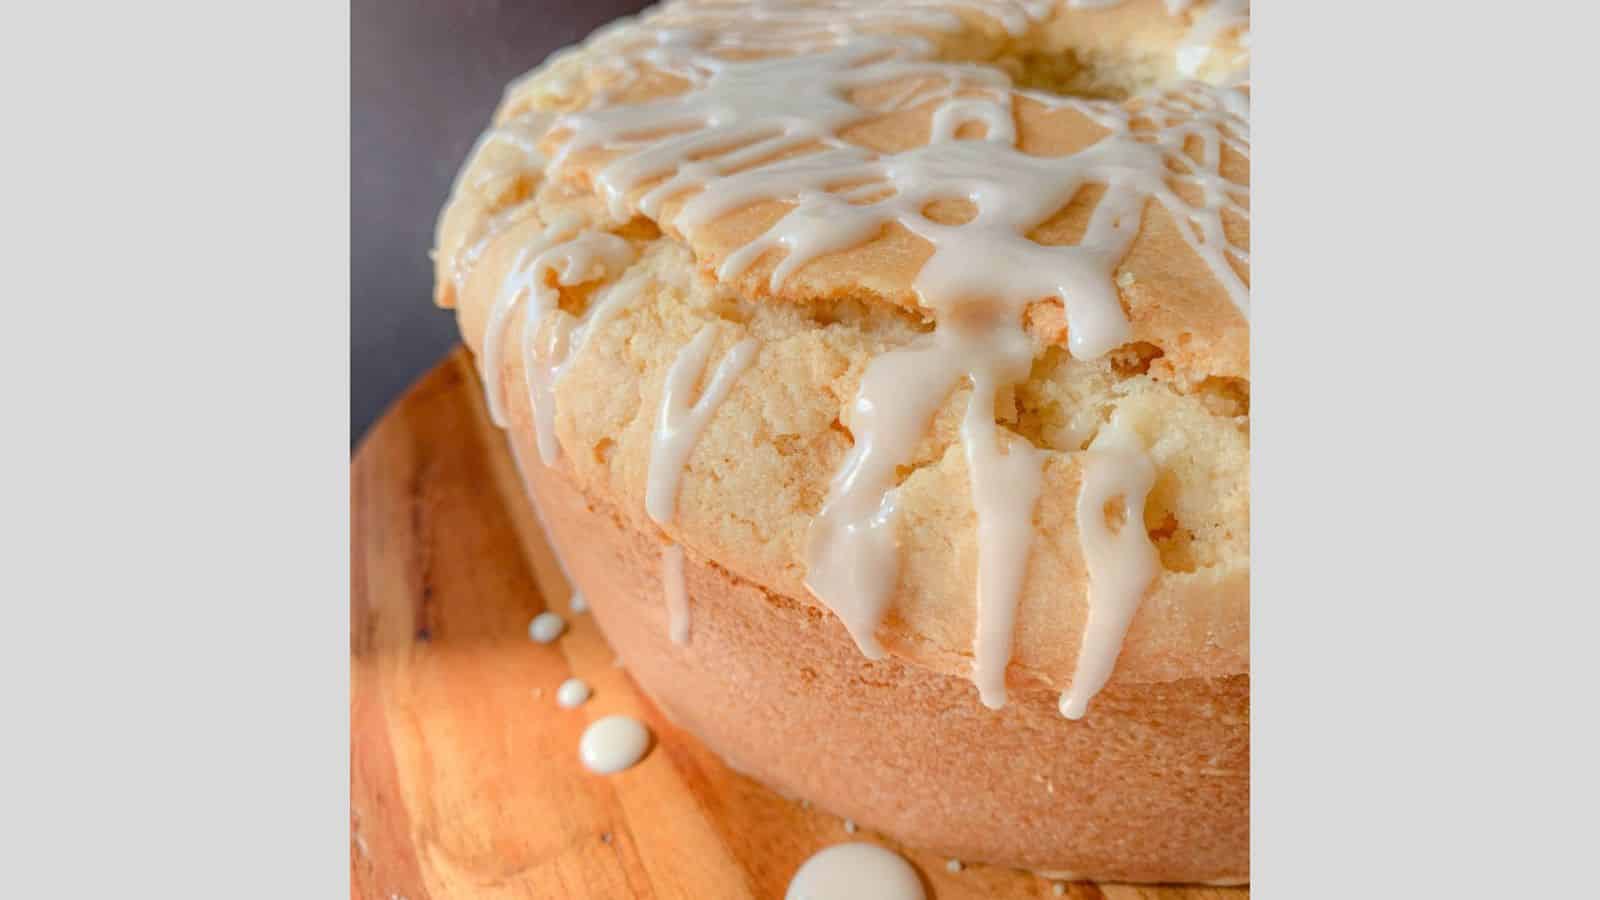 A large pound cake with sugar glaze dripping over the edges and down the sides.